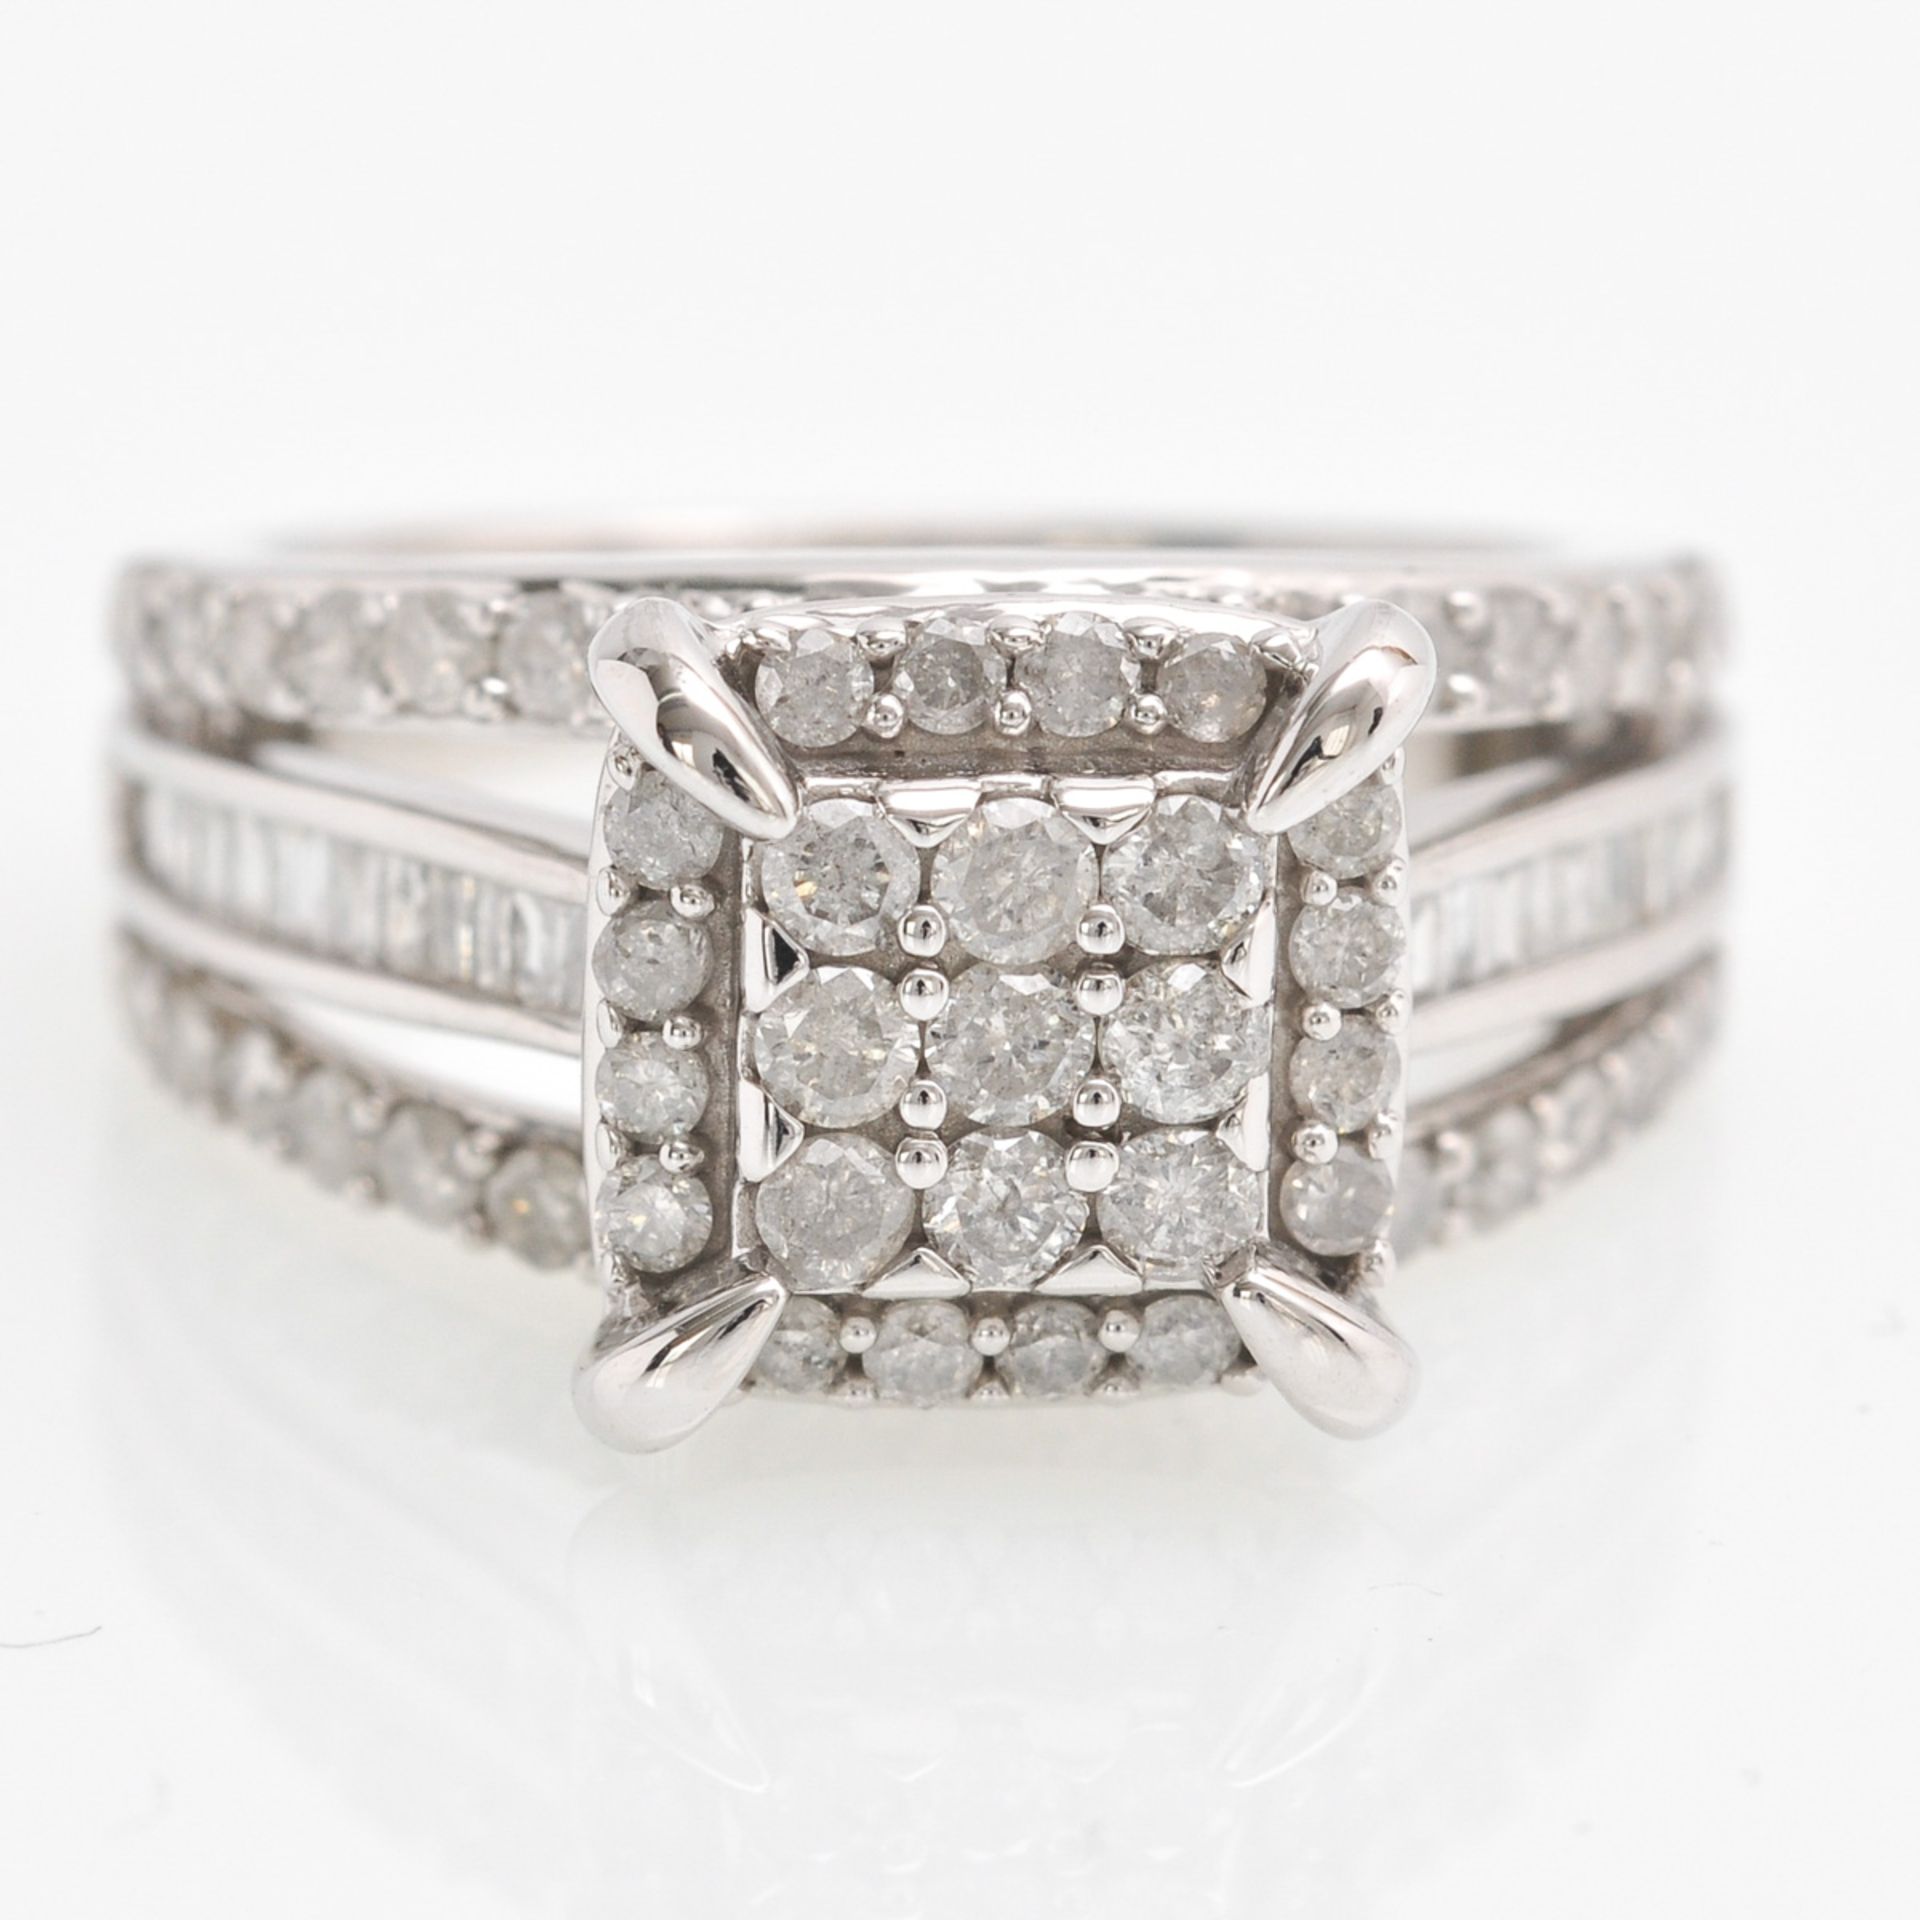 A 10KWG Ladies Diamond Ring Approximately 1.23 CTW